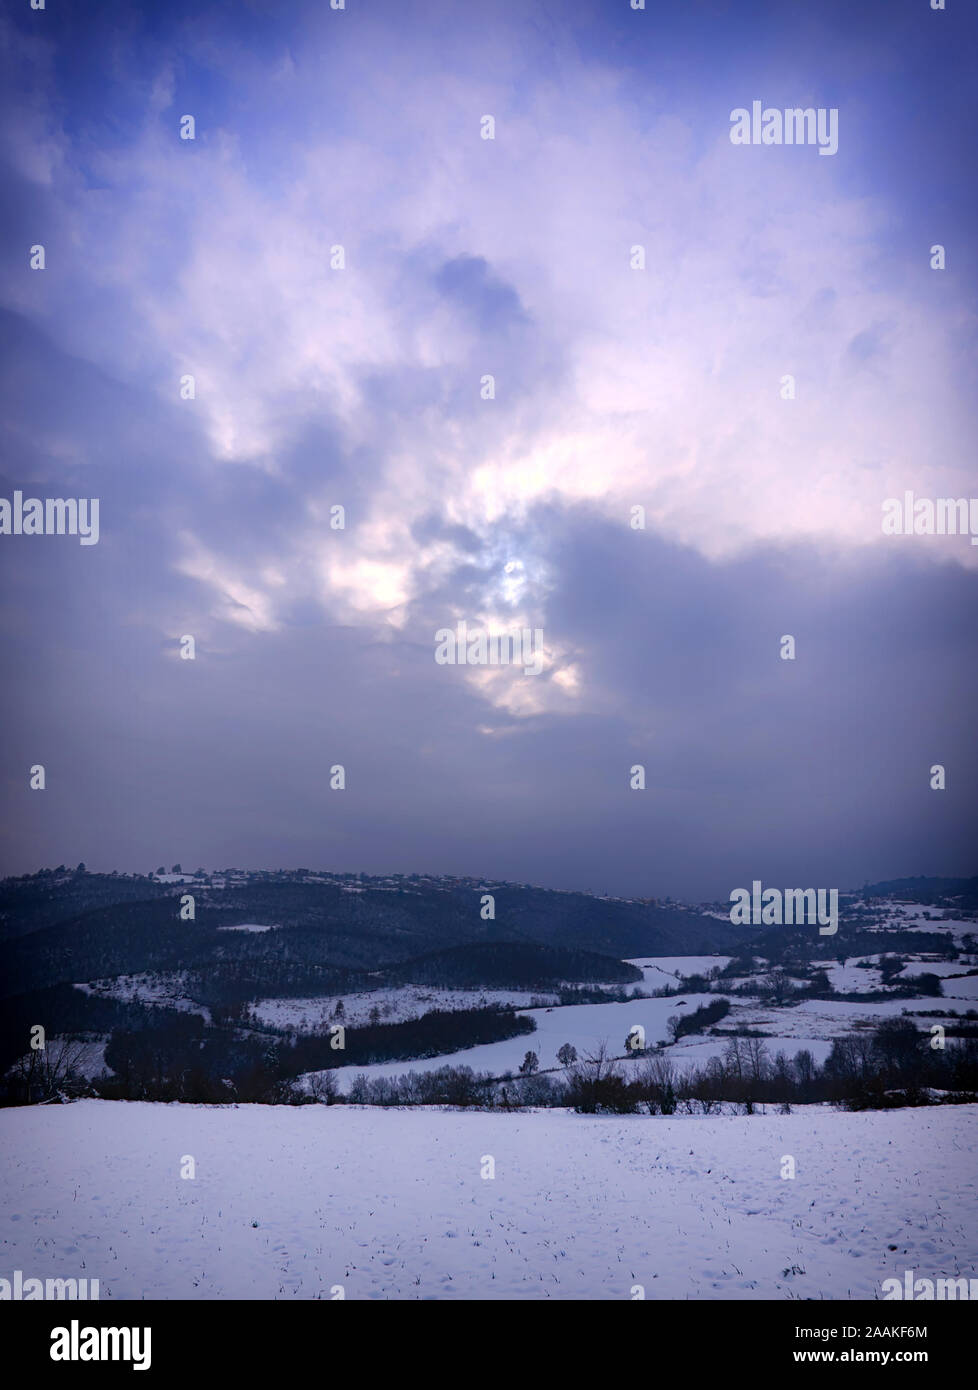 Dreamy colorful winter landscape. Mountains and land covered in snow, Pieria, Greece. Stock Photo